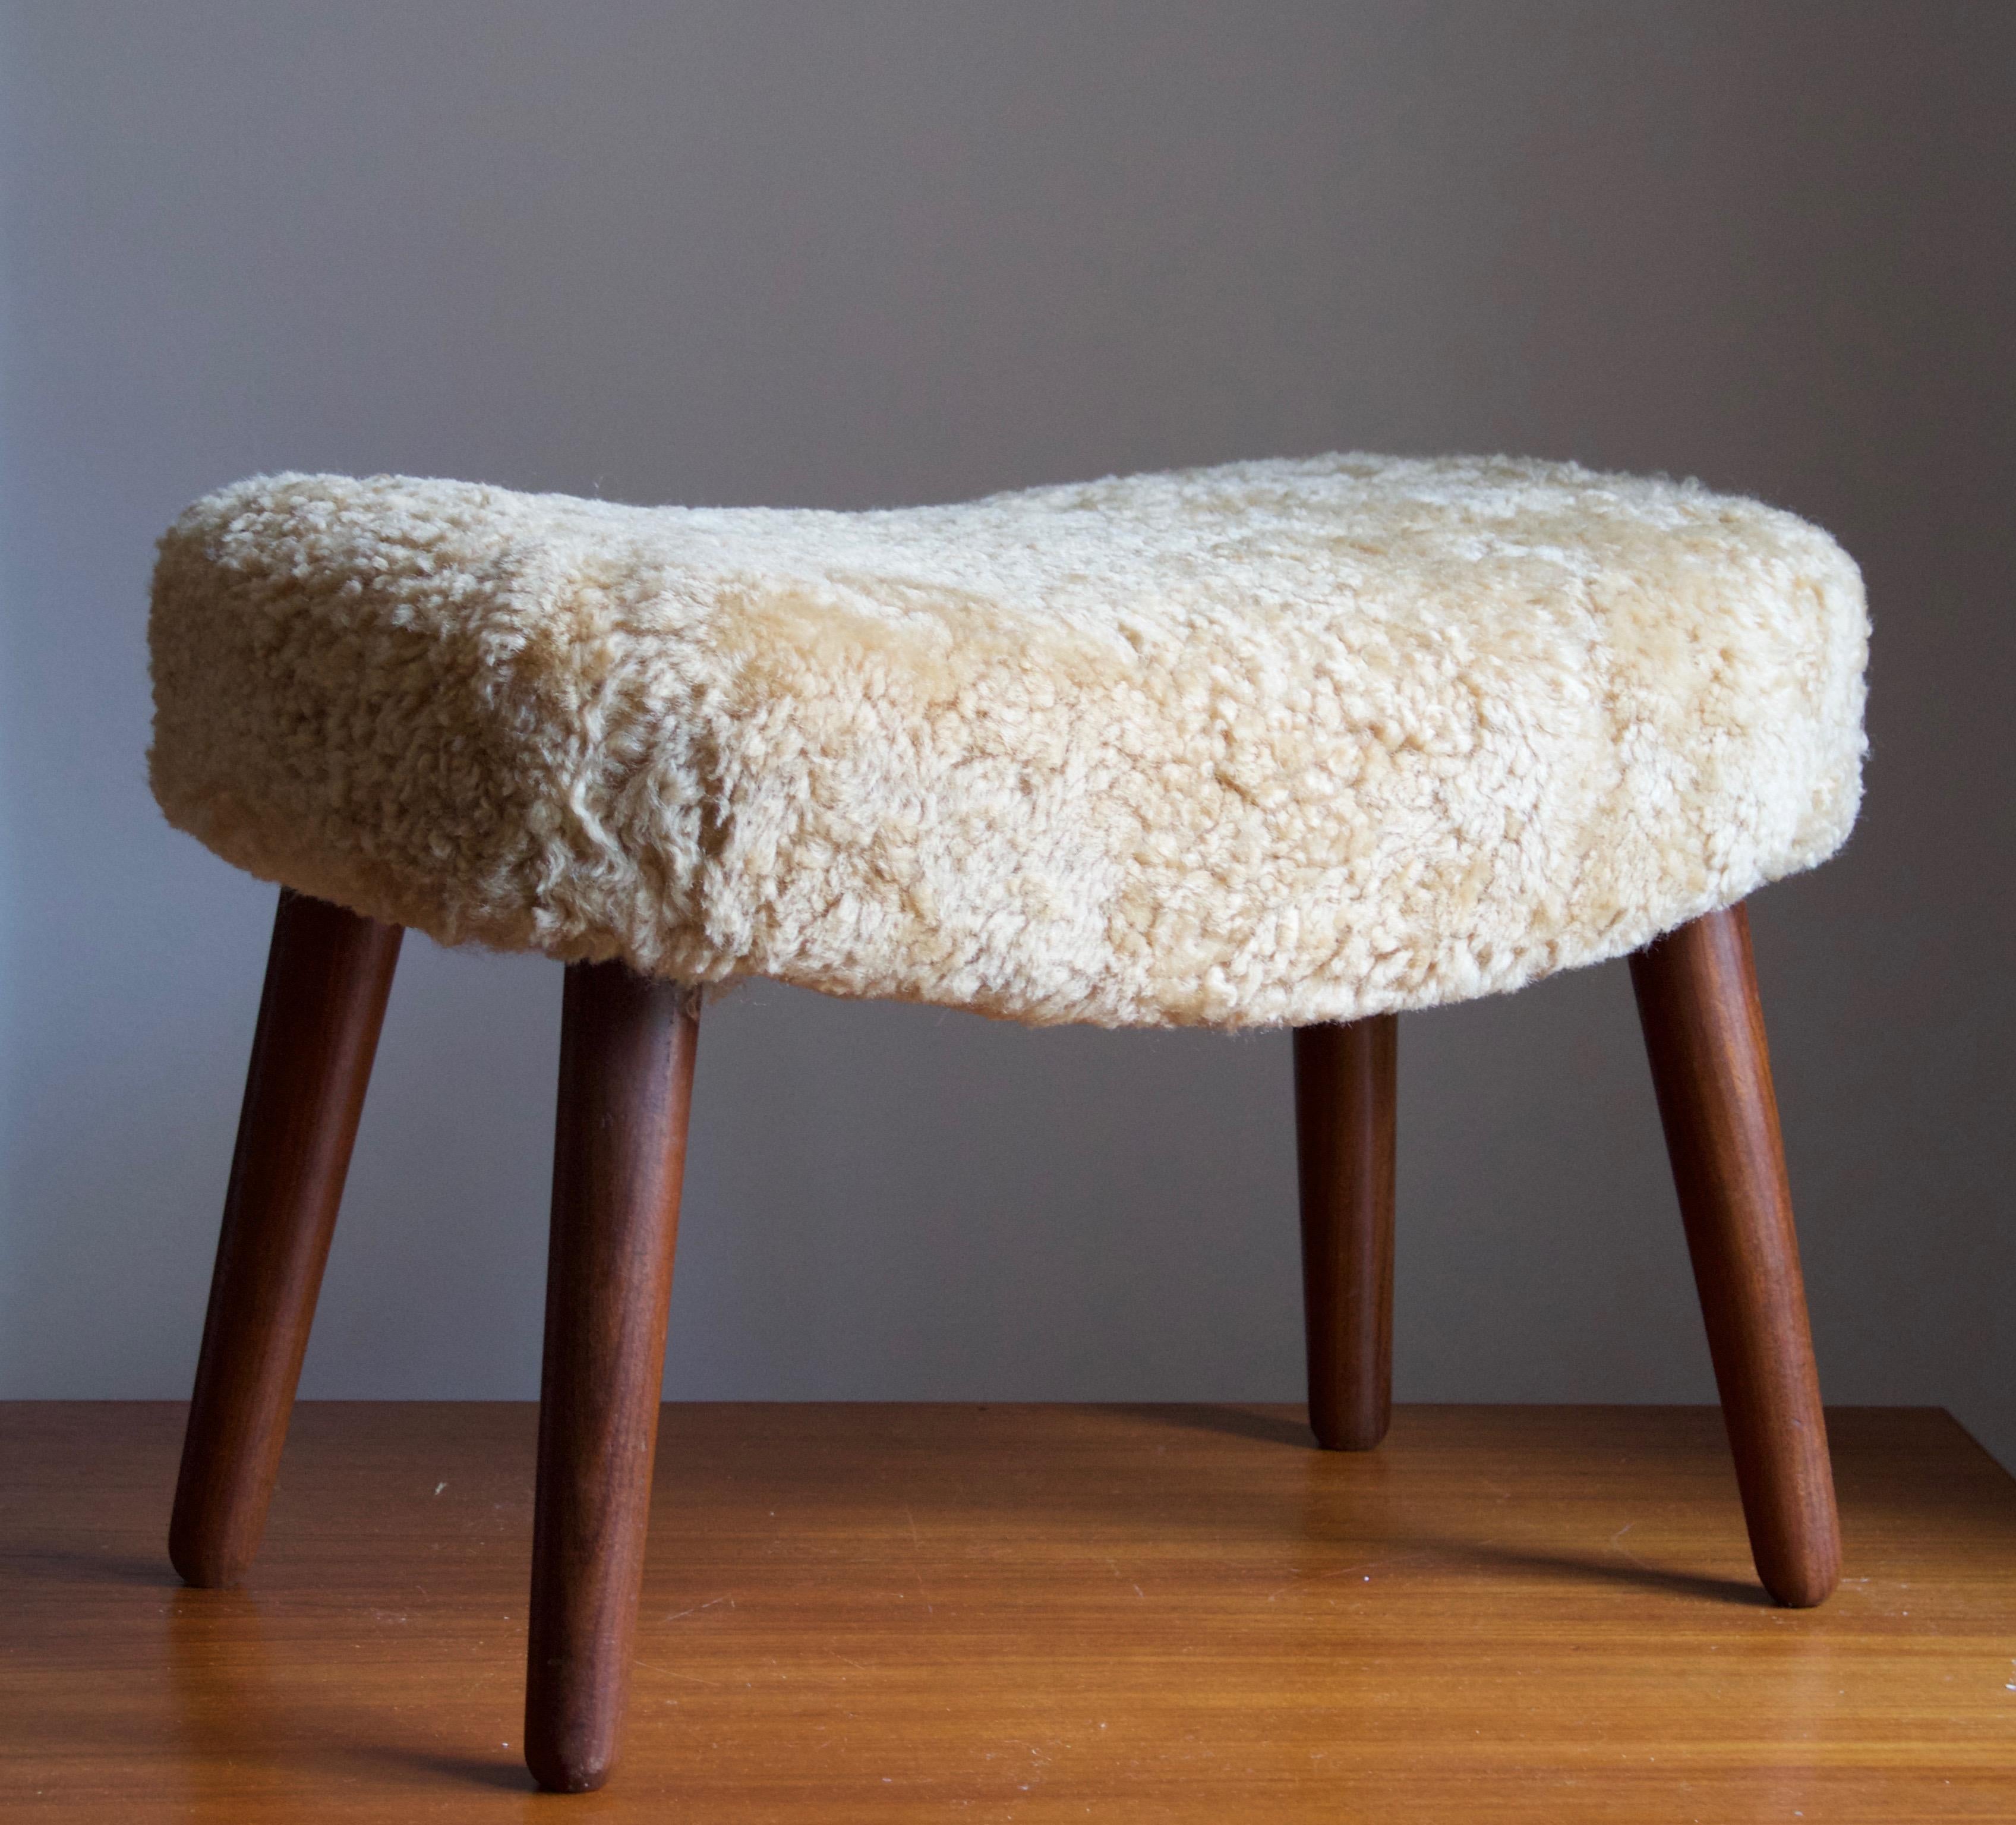 A stool. Designed and produced by Ib Madsen & Acton Schubell. Produced in Denmark, 1950s.

Reupholstered in brand new beige sheepskin.

Other designers of the period include Philip Arctander, Viggo Boesen, Gio Ponti, Vladimir Kagan, and Flemming